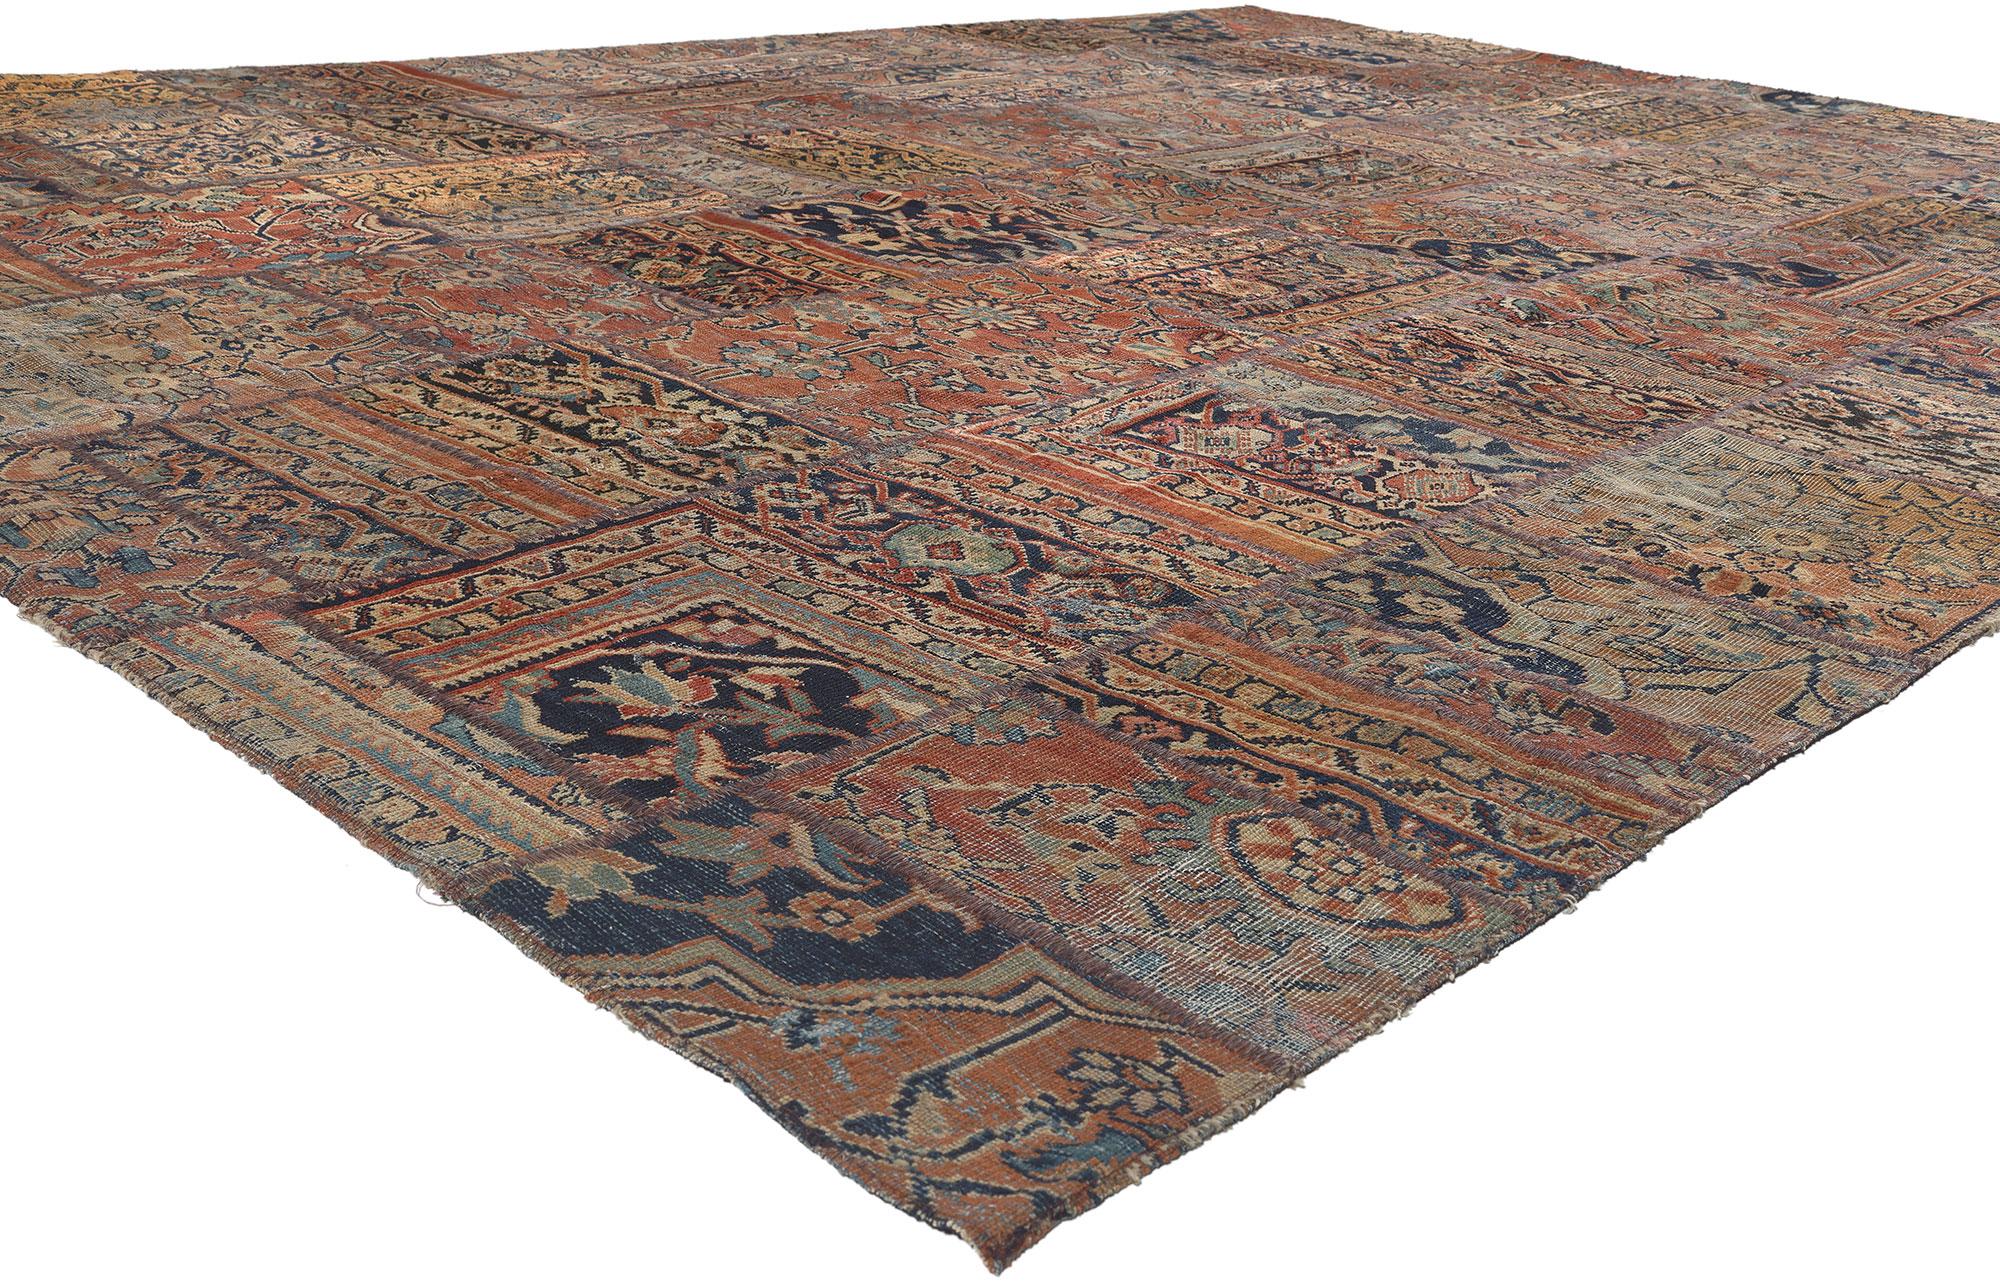 78601 Distressed Vintage Persian Mahal Patchwork Rug, 09'06 x 13'02. In the fusion of Modern Industrial style and rugged beauty, discover the artistry of this hand knotted wool vintage Persian Mahal patchwork rug—an embodiment of sustainable design